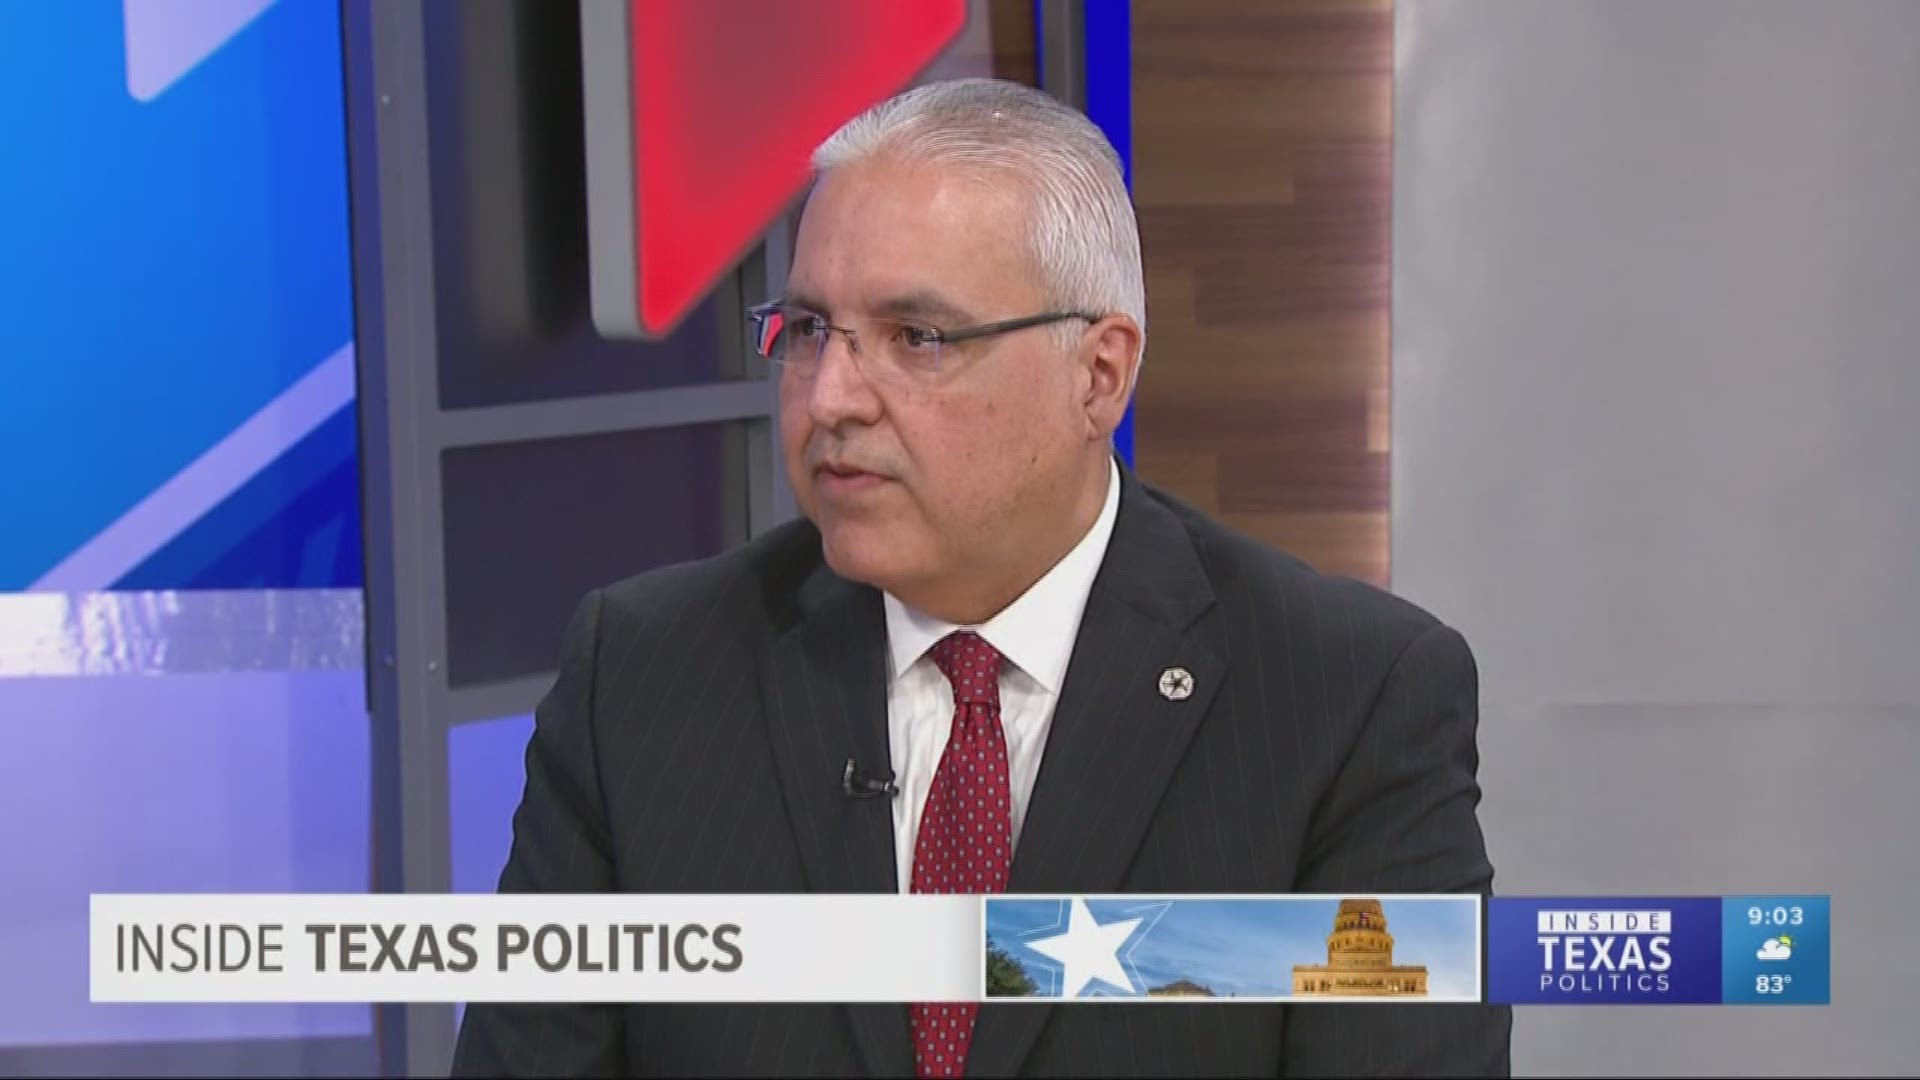 This week, Inside Texas Politics discussed the Texas Education Agency’s new school rankings. Arlington ISD is pleased with its score. The district moved up to a “B” from a “C” last year. It now wants voters to approve a nearly $1 billion bond package.